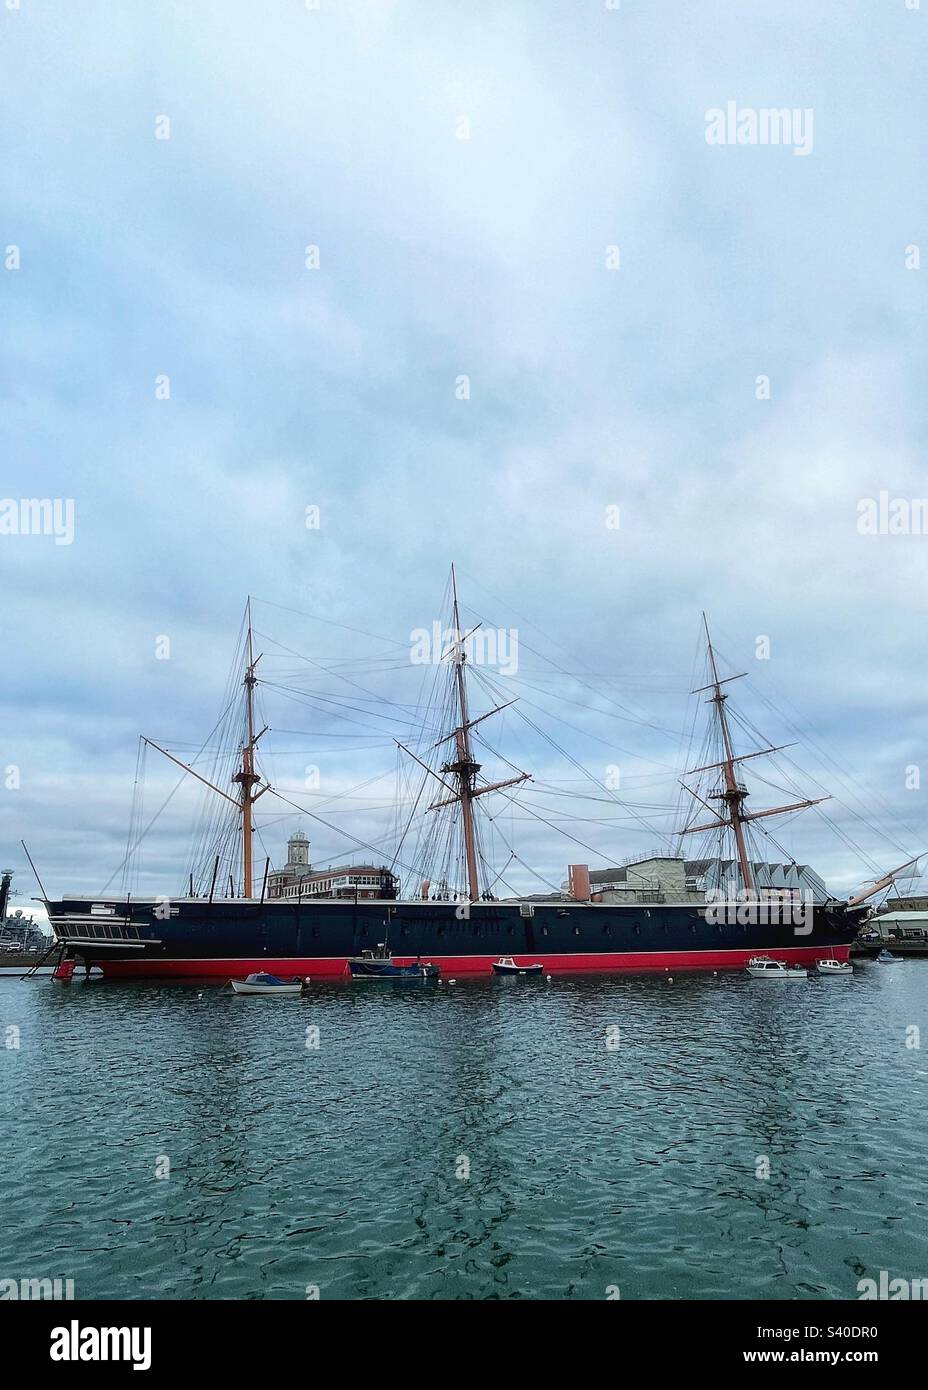 HMS Warrior is a 40-gun steam-powered armoured frigate for the Royal Navy in 1859–1861. It is preserved heritage asset in Portsmouth harbour Stock Photo